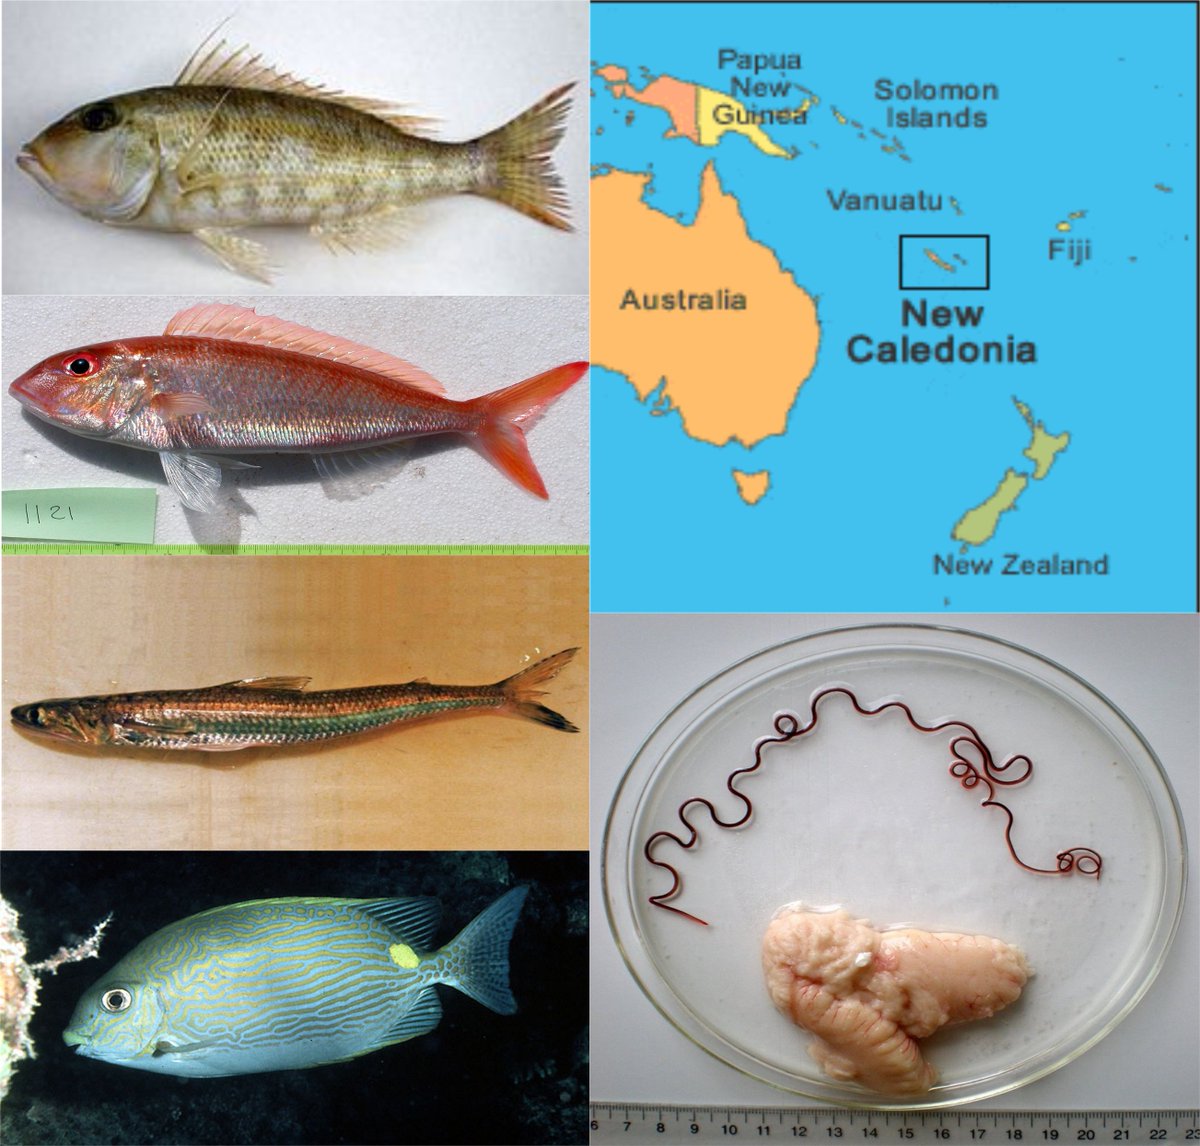 New work out describing the stable isotope relationships for C and N between helminth parasites and their coral reef fish hosts from New Caledonia. Stable #isotopes do not behave the same between #parasite groups, attachment sites, or host SI value. nature.com/articles/s4159…